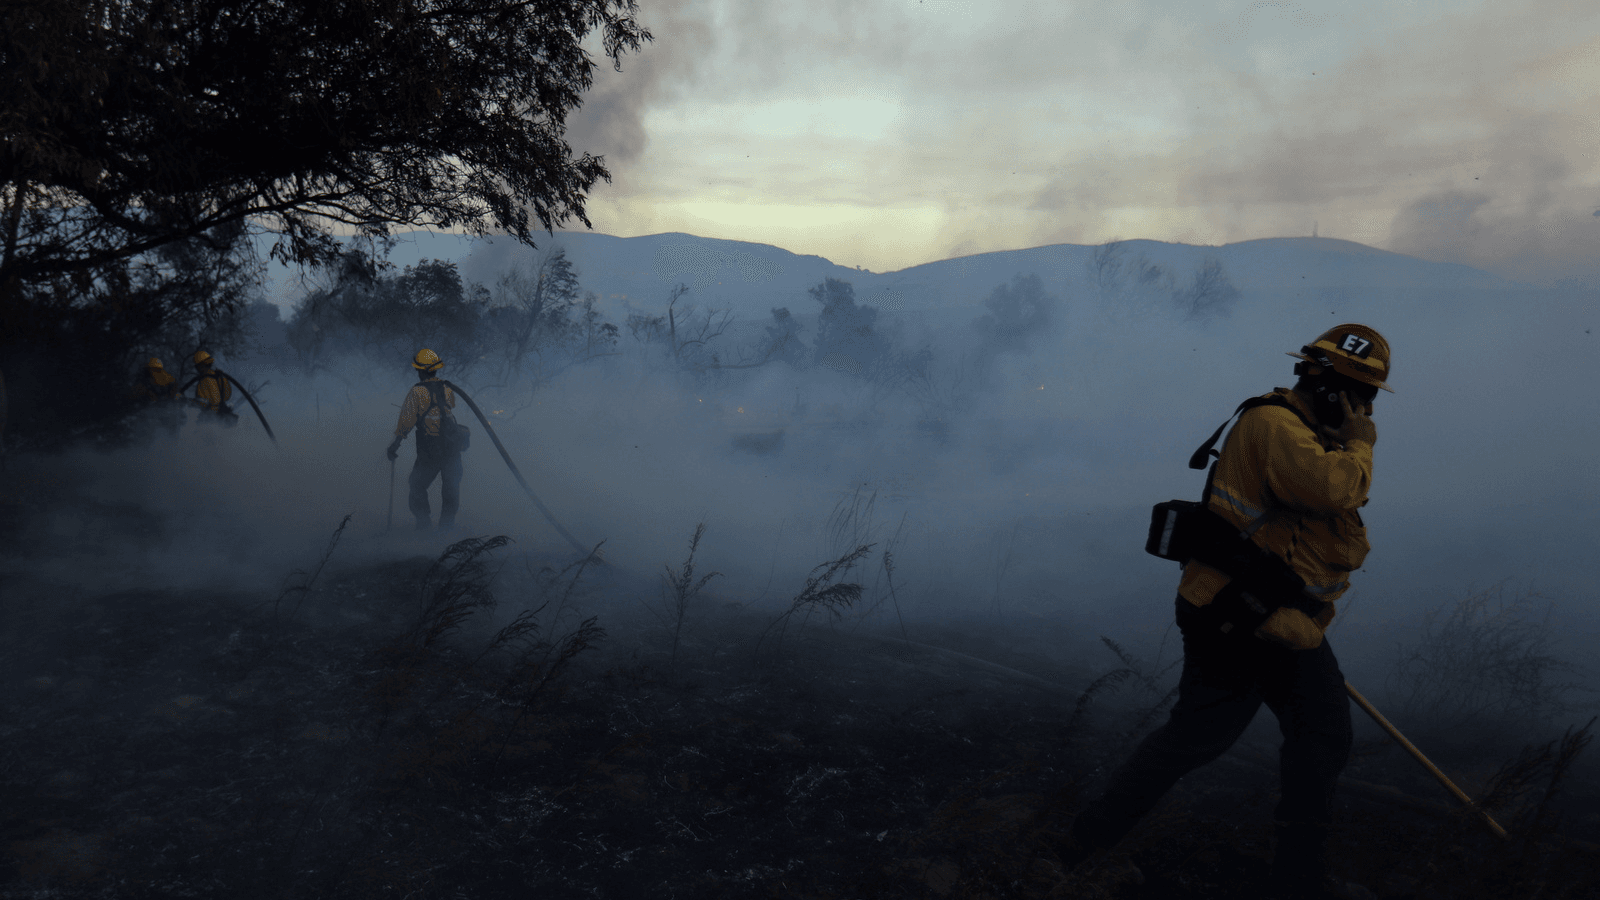 Firefighters work to put out hot spots on a fast moving wind driven wildfire in Orange, California, Oct. 9, 2017.